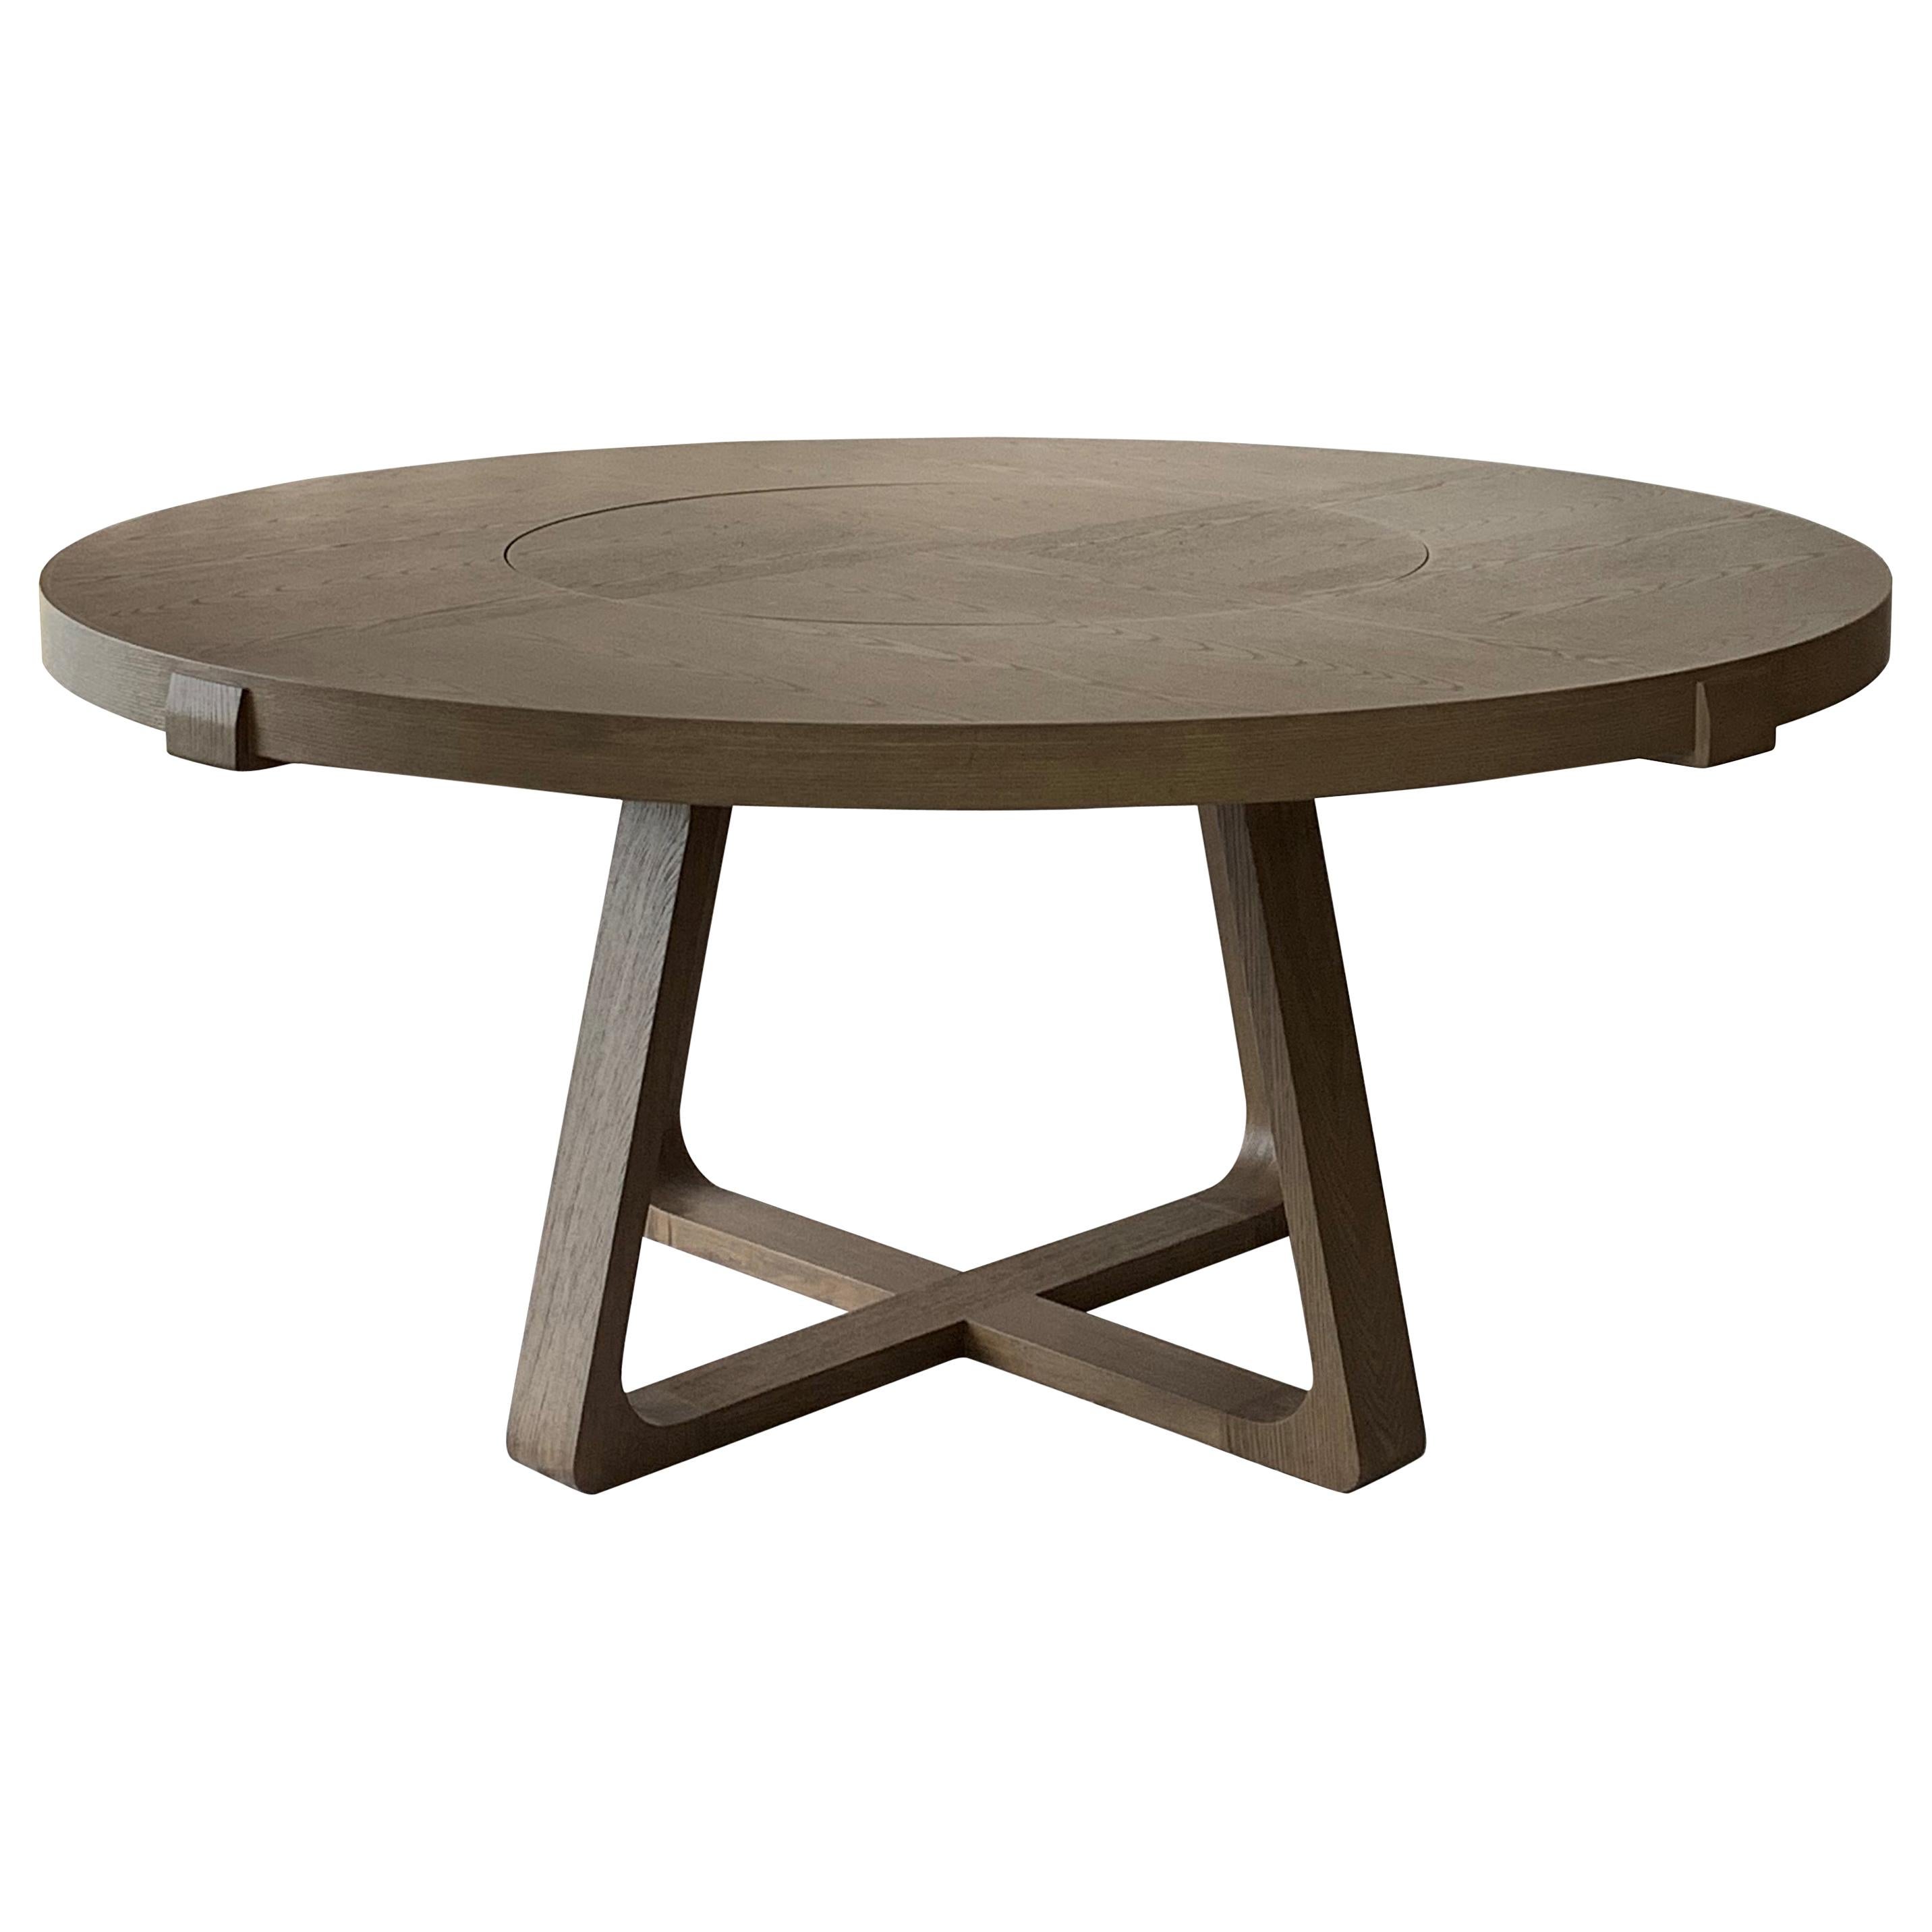 Interlock Round Dining Table with Lazy Suzan in 200cm by André Fu Living 